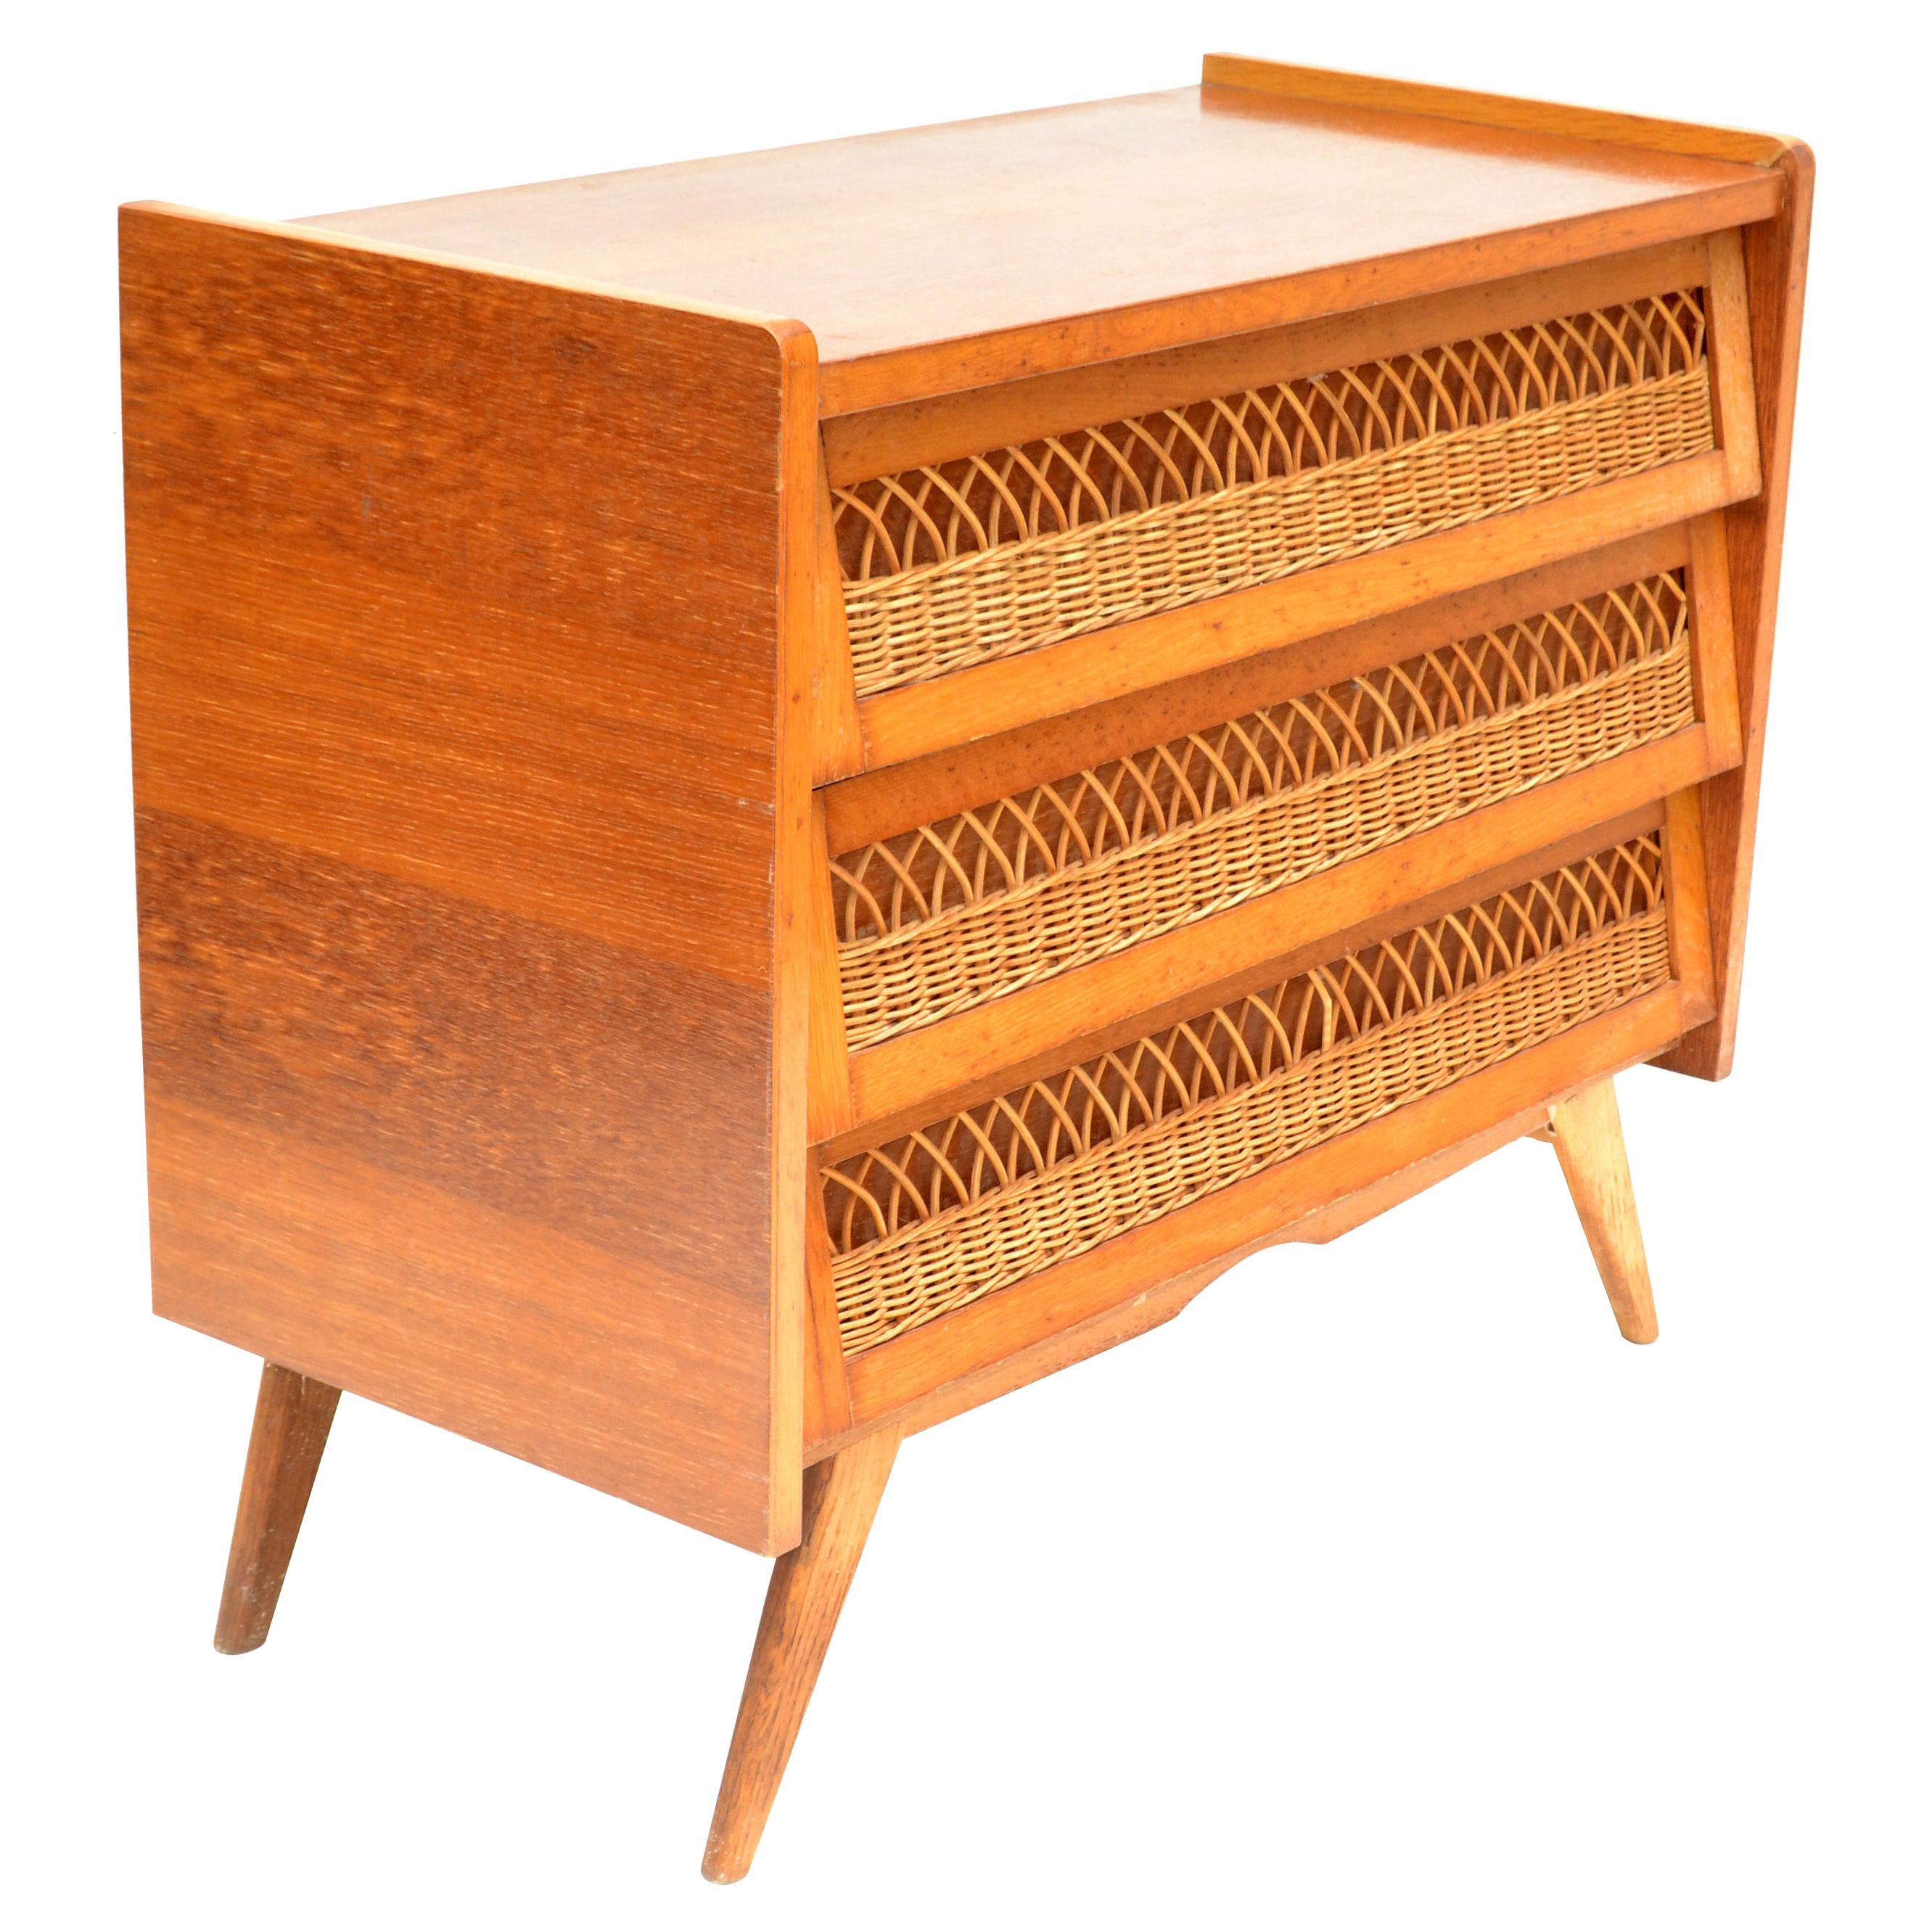 French Mid-Century Modern Rattan and Wood Commode Dresser